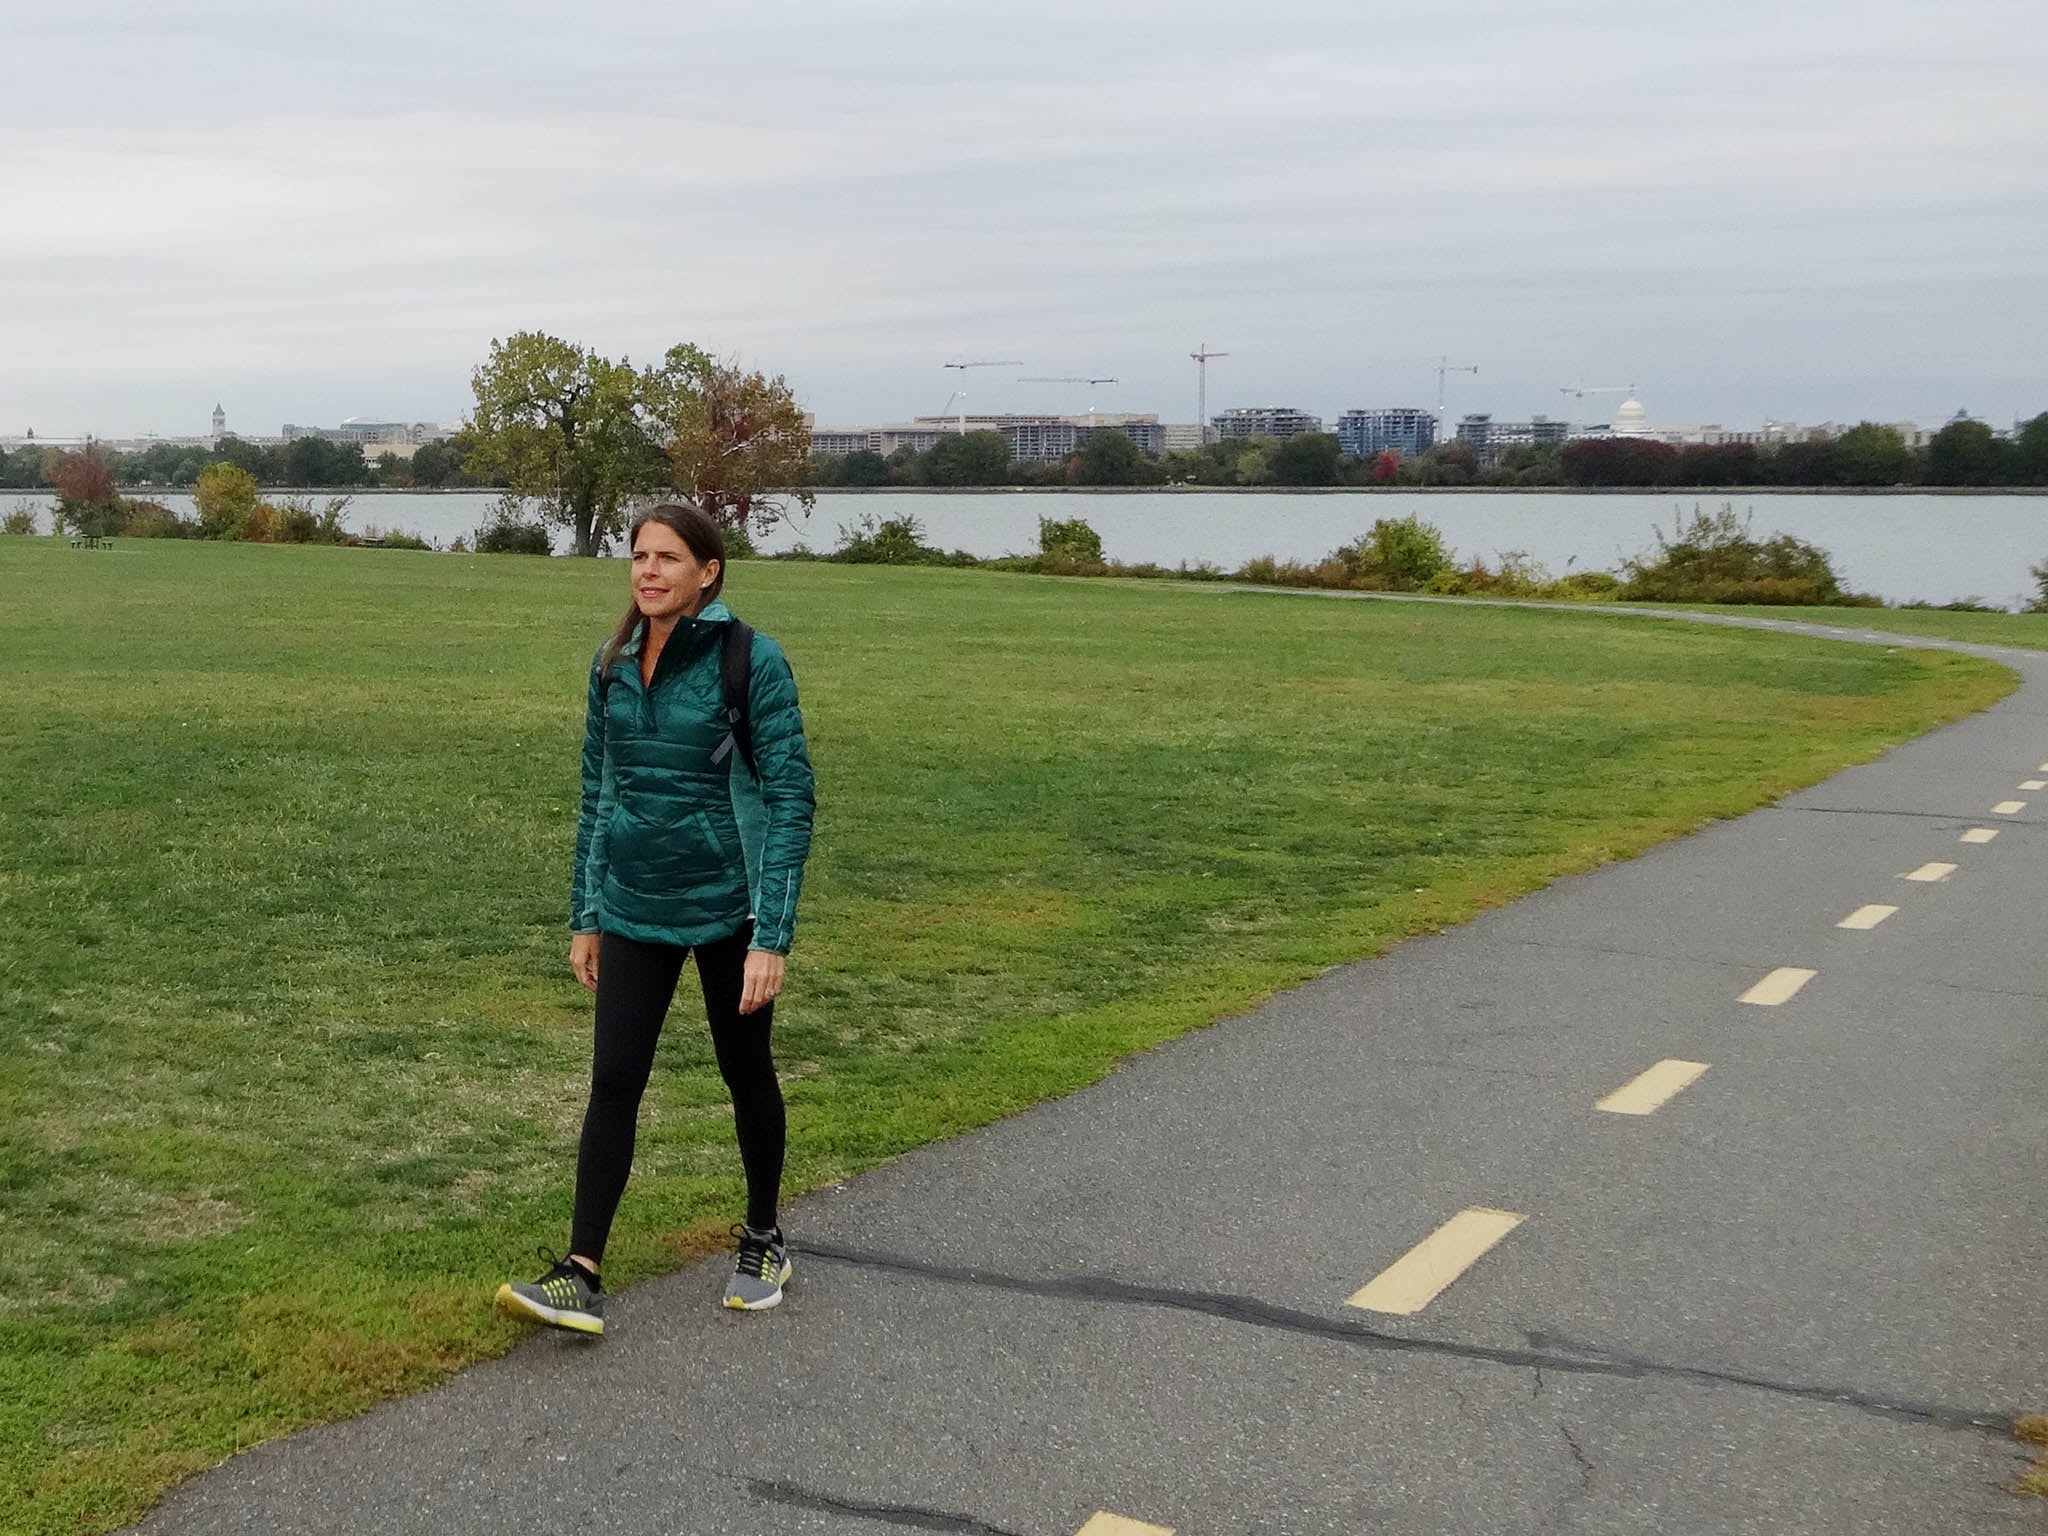 Jenny Rough walks along a path at Gravelly Point in Virginia, near the George Washington Memorial Parkway